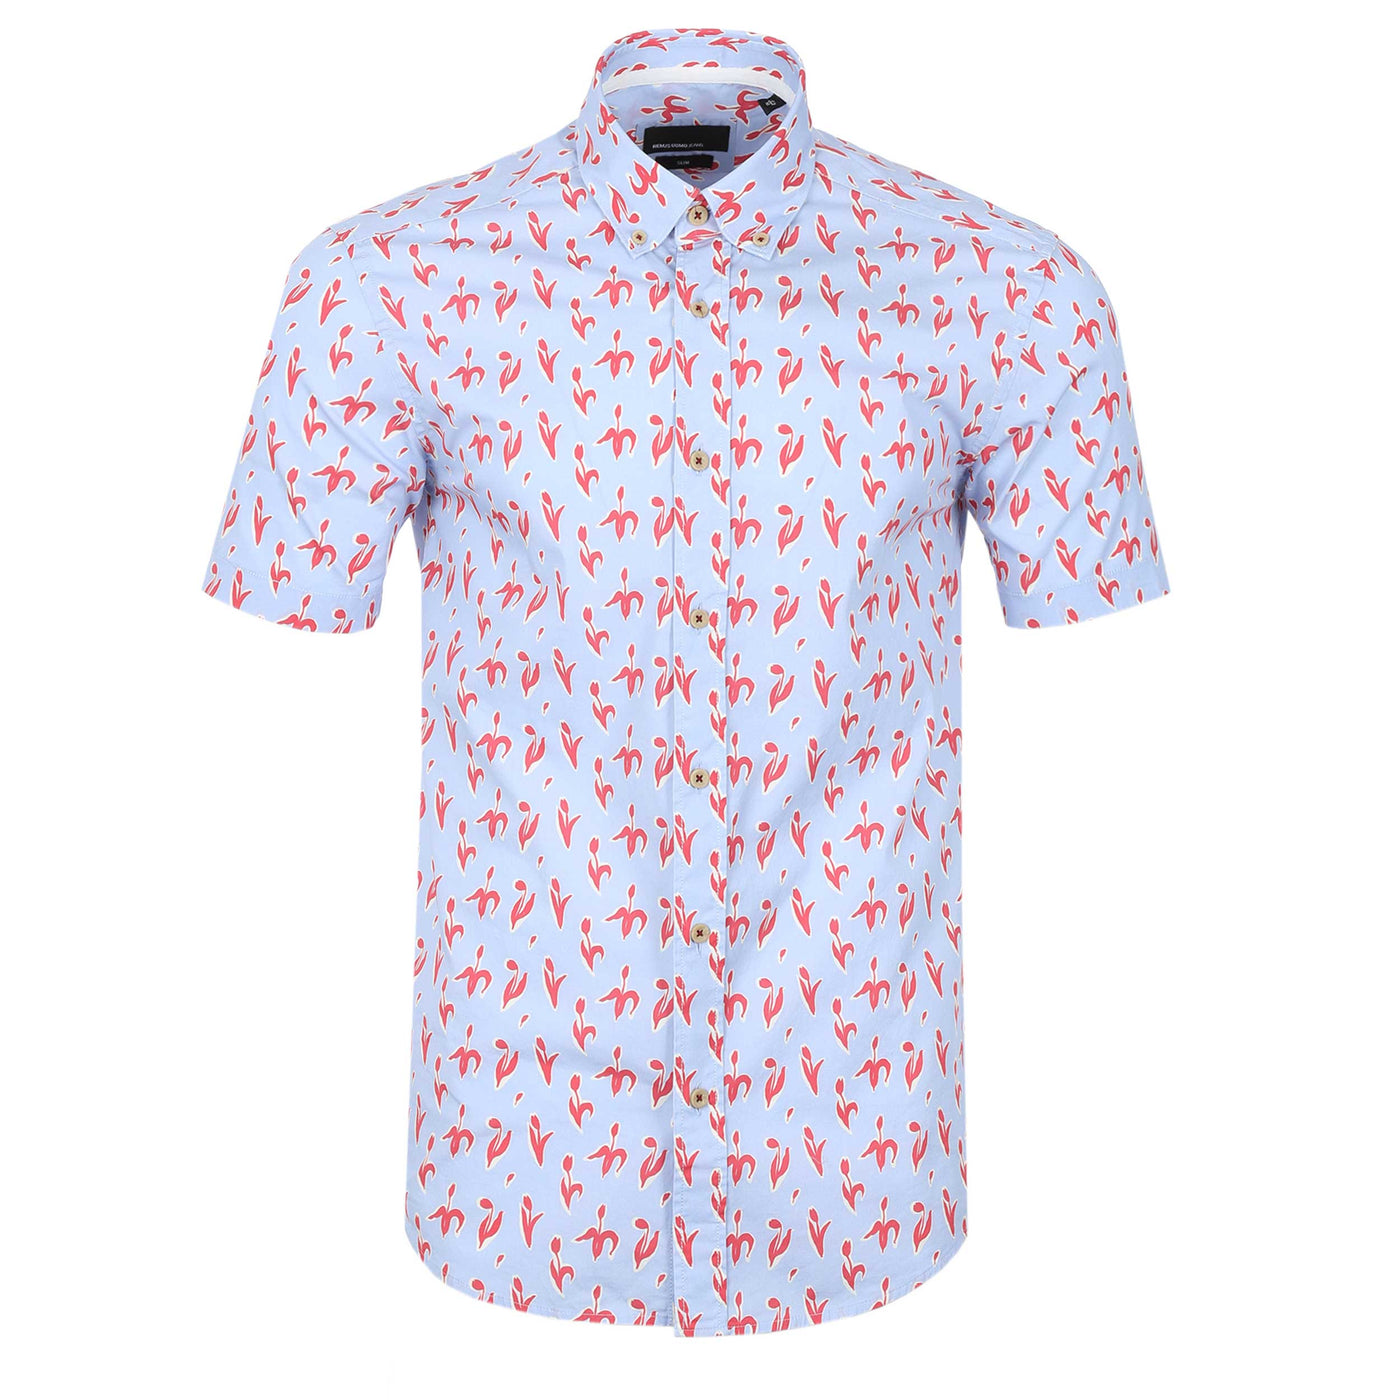 Remus Uomo Small Floral Print Short Sleeve Shirt in Sky Blue & Red